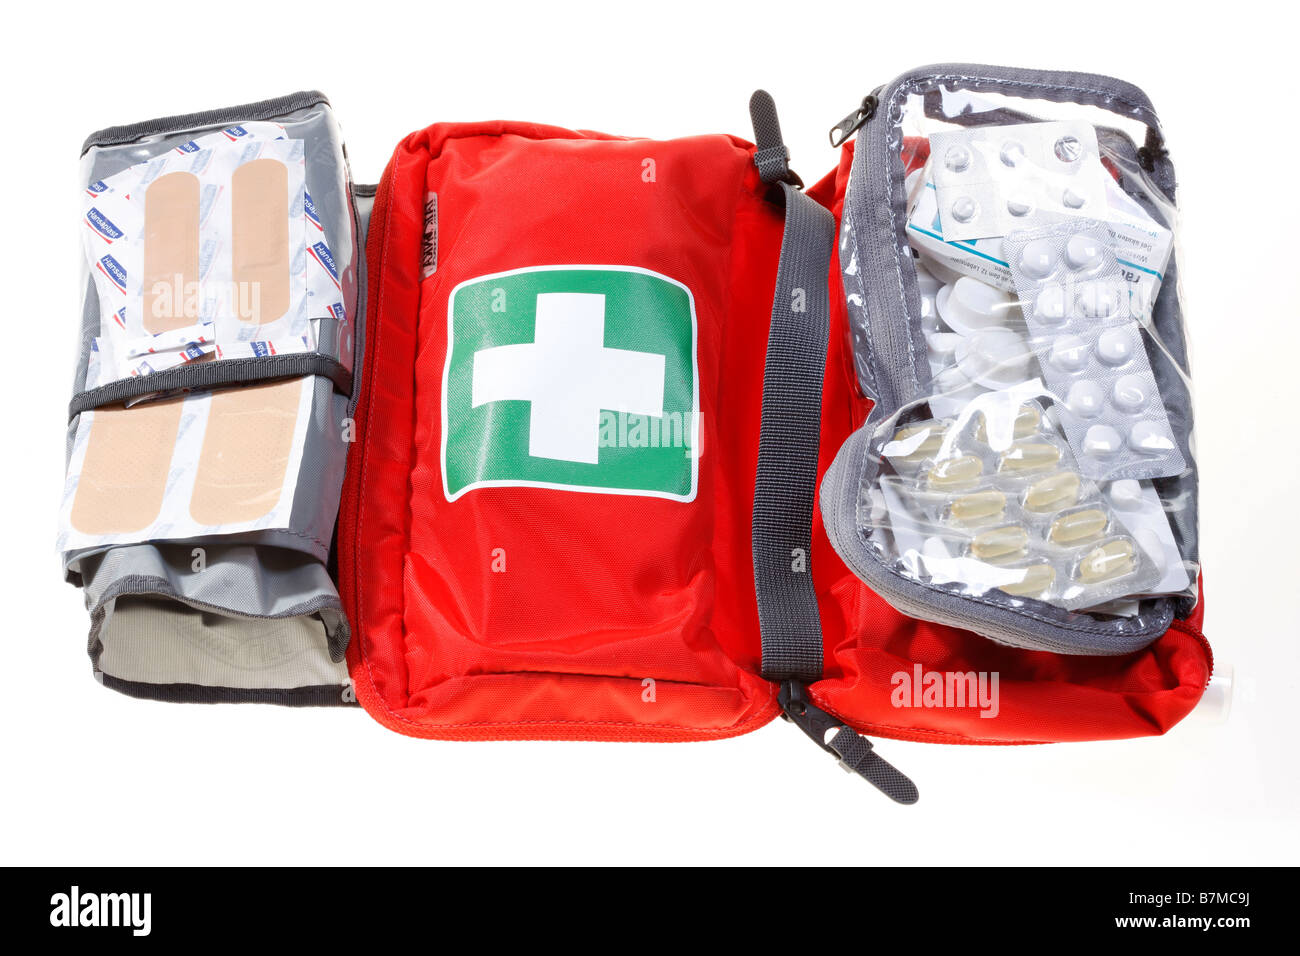 First aid box, pack and mobile, personal pharmacy, medicaments, for traveling. Stock Photo